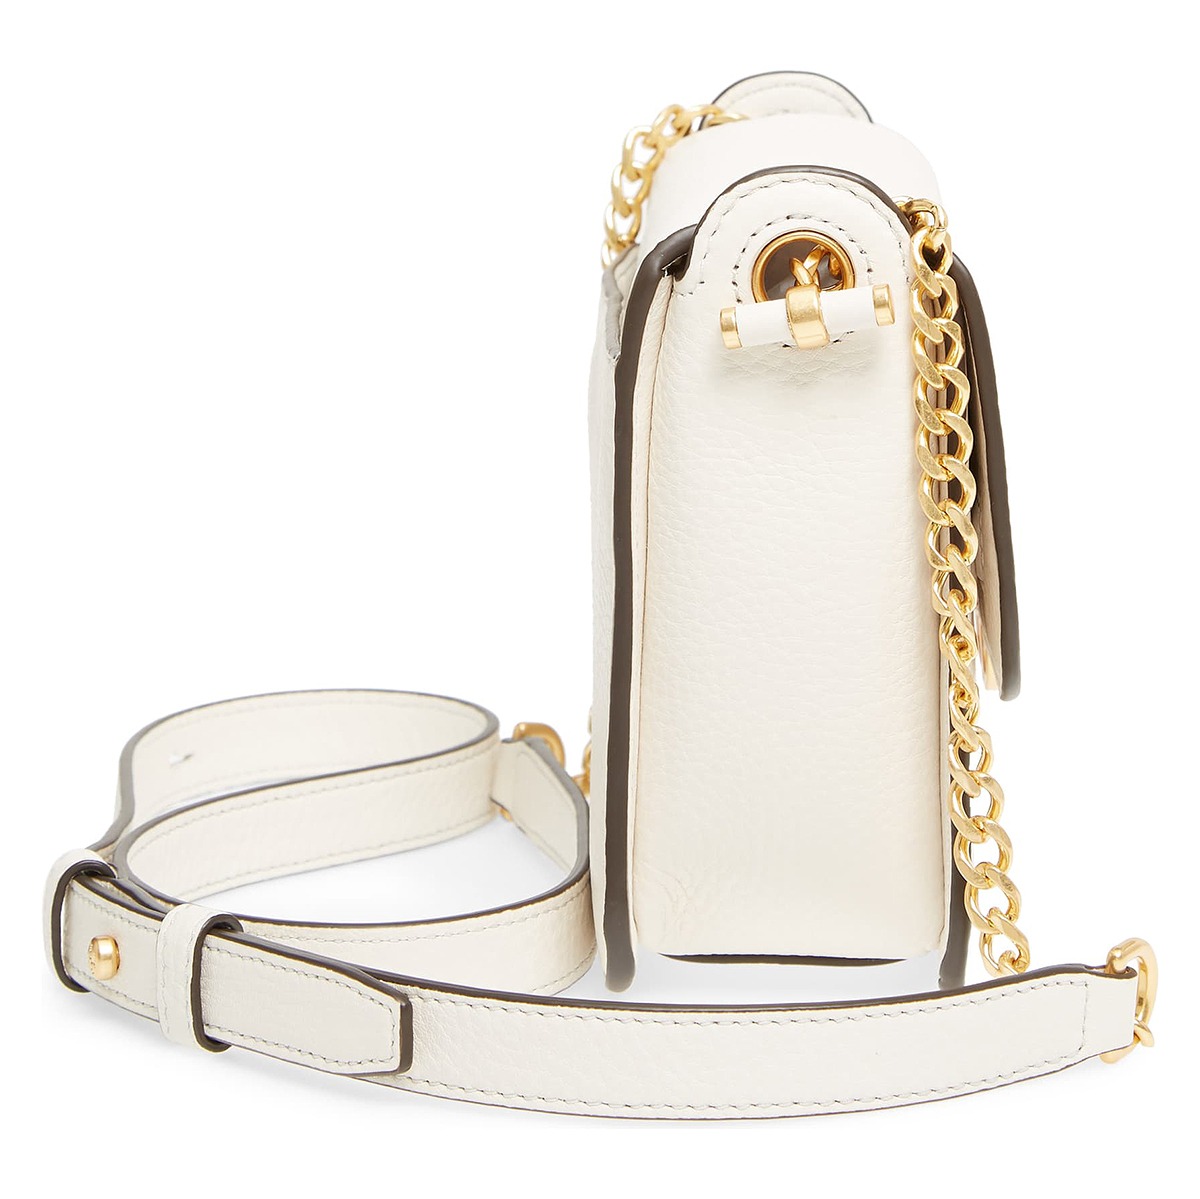 The Sale on This Tory Burch Chelsea Crossbody Is Legendary